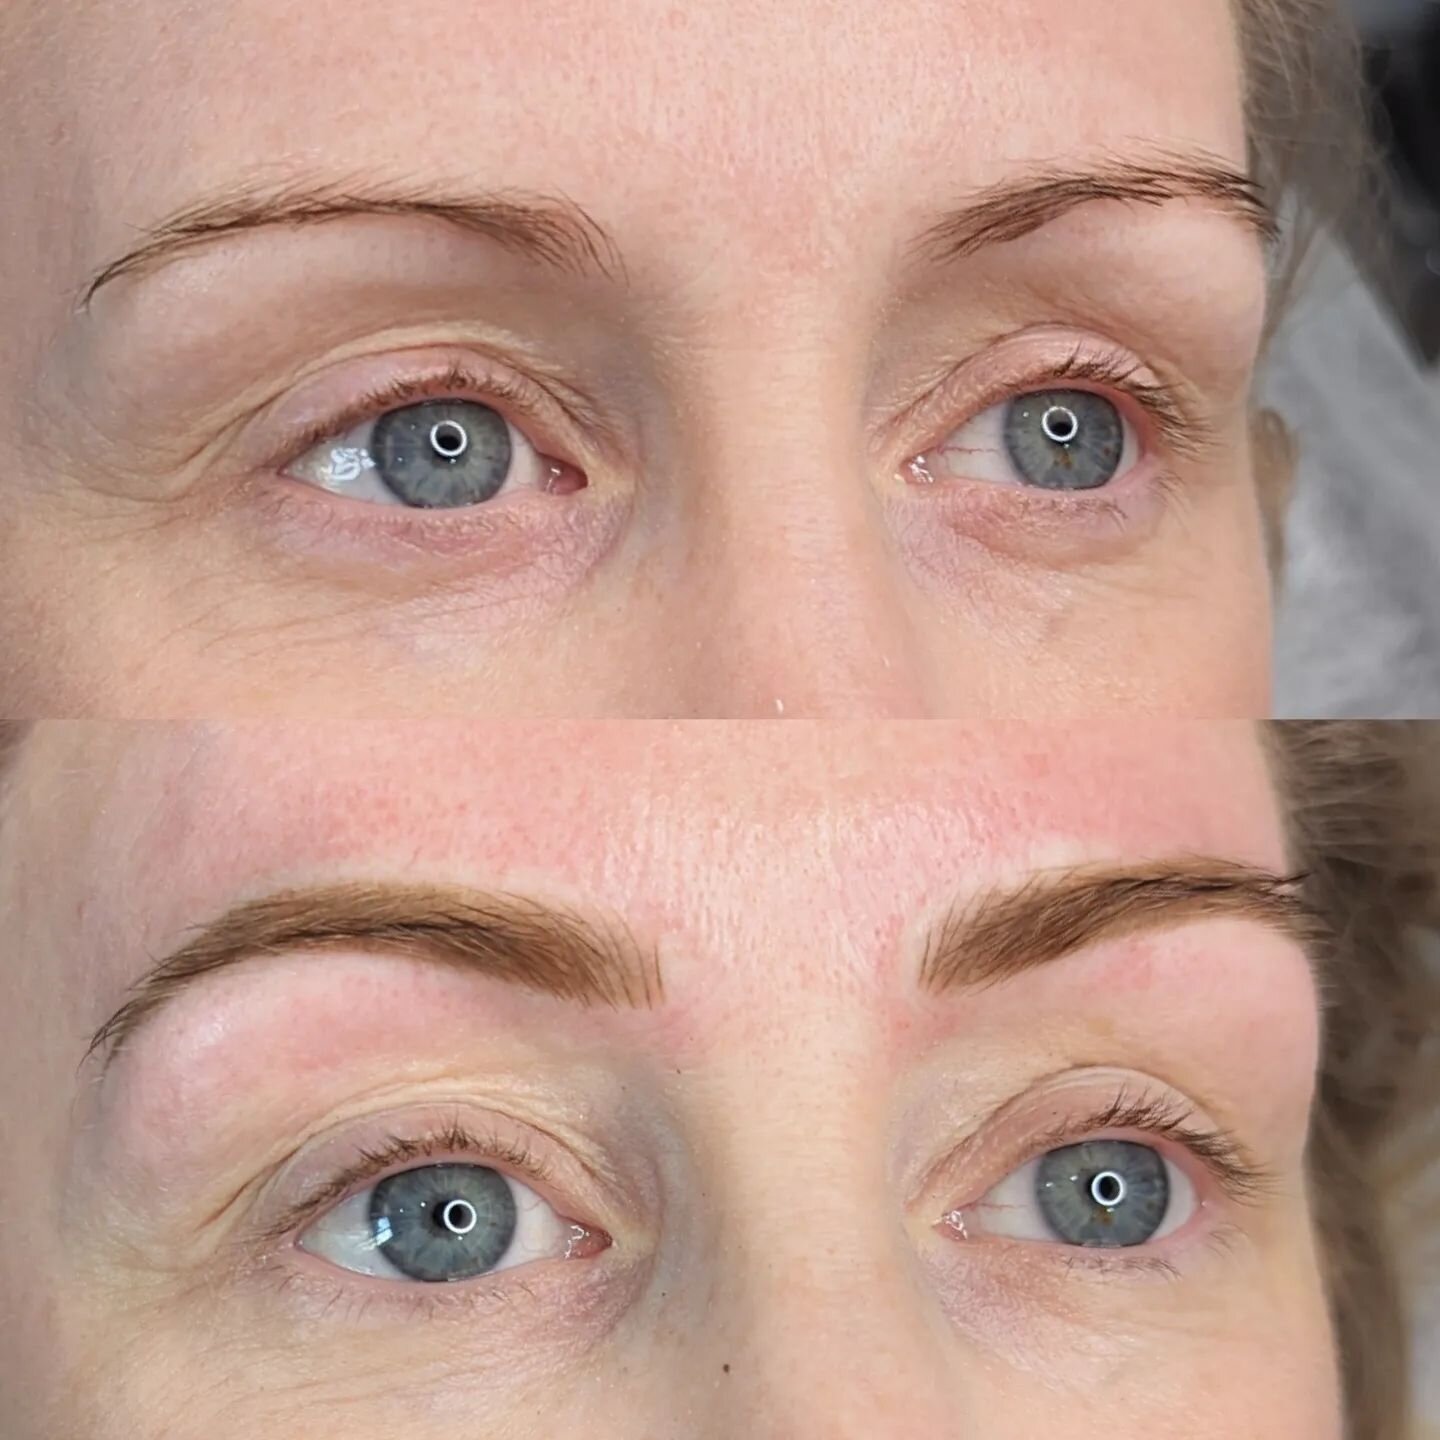 A fuller and more shapely brow using the combination brow technique.
Soft hairstrokes leading into a soft yet defined powder brow.
Warm tone is more neutralises once the pigment is healed under the skin.

For enquiries, availability or to book please